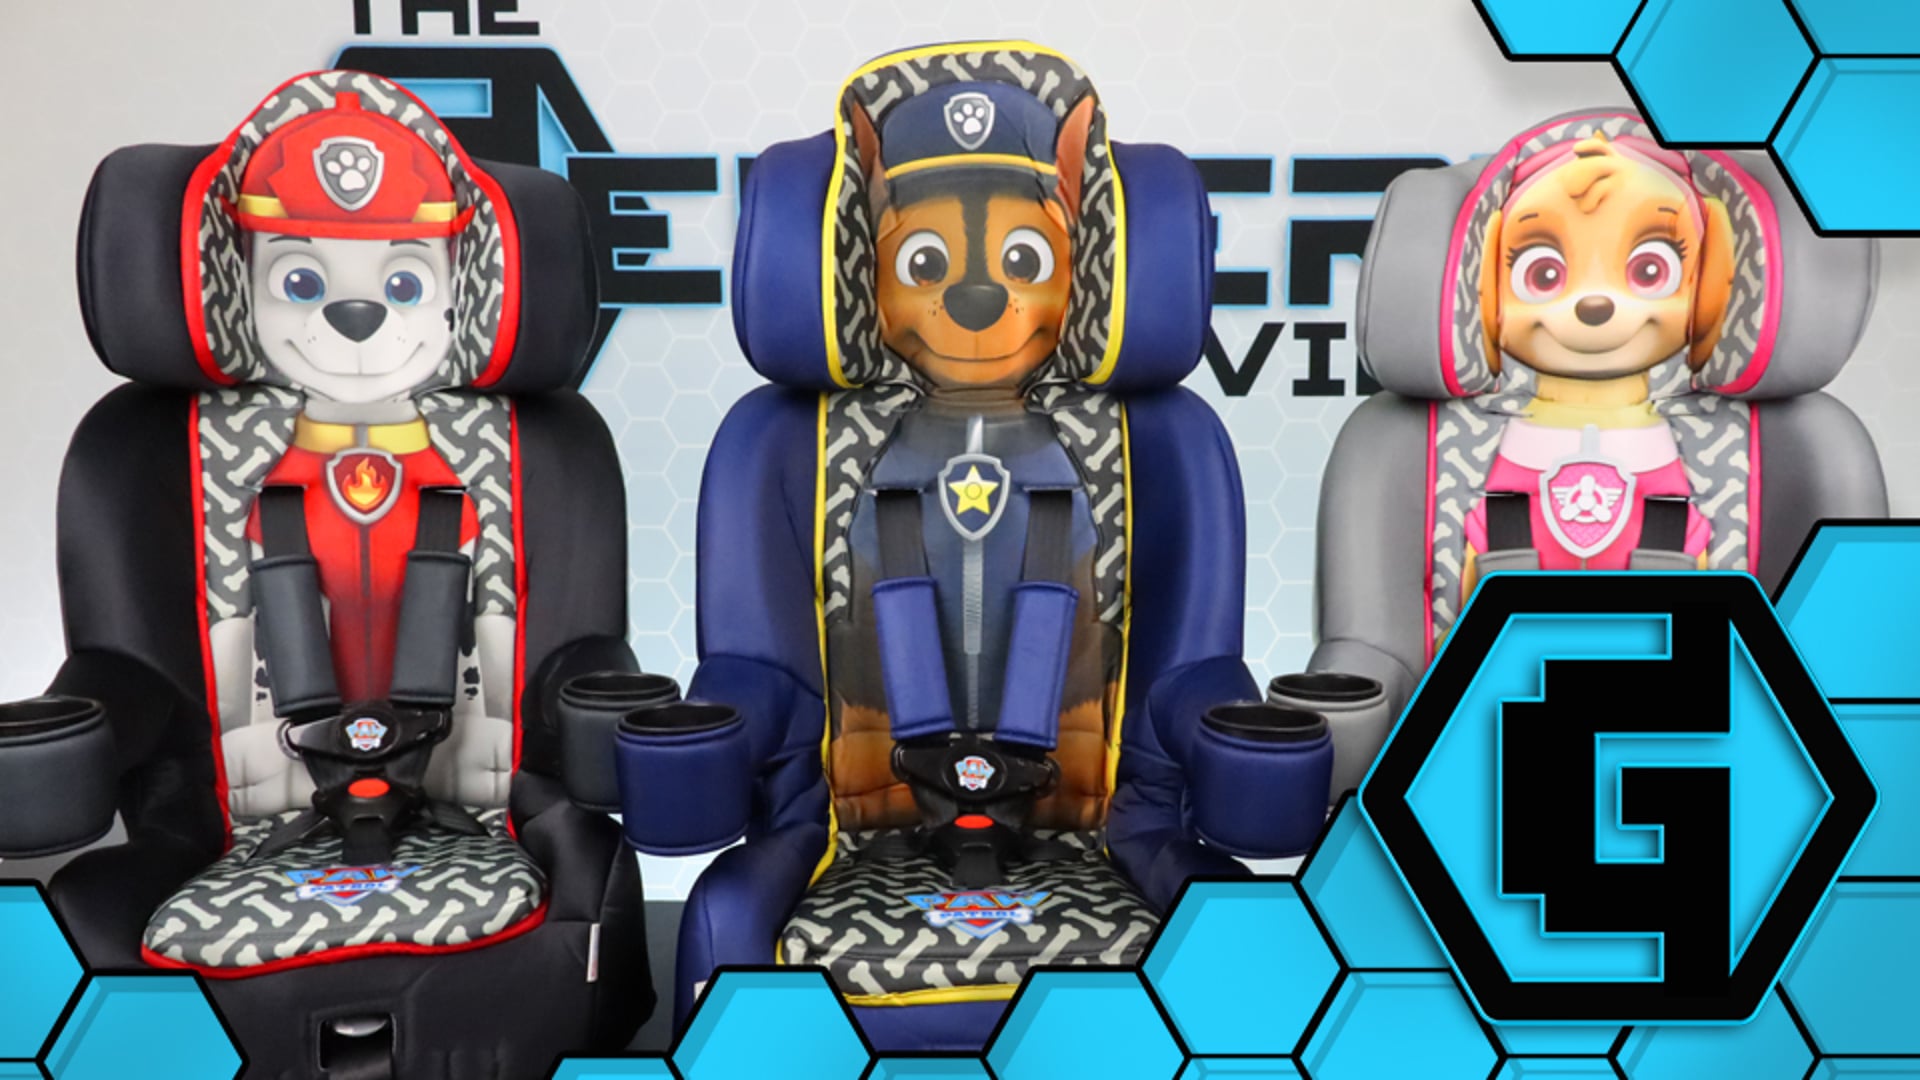 The Geekery View - Paw Patrol Car Seat